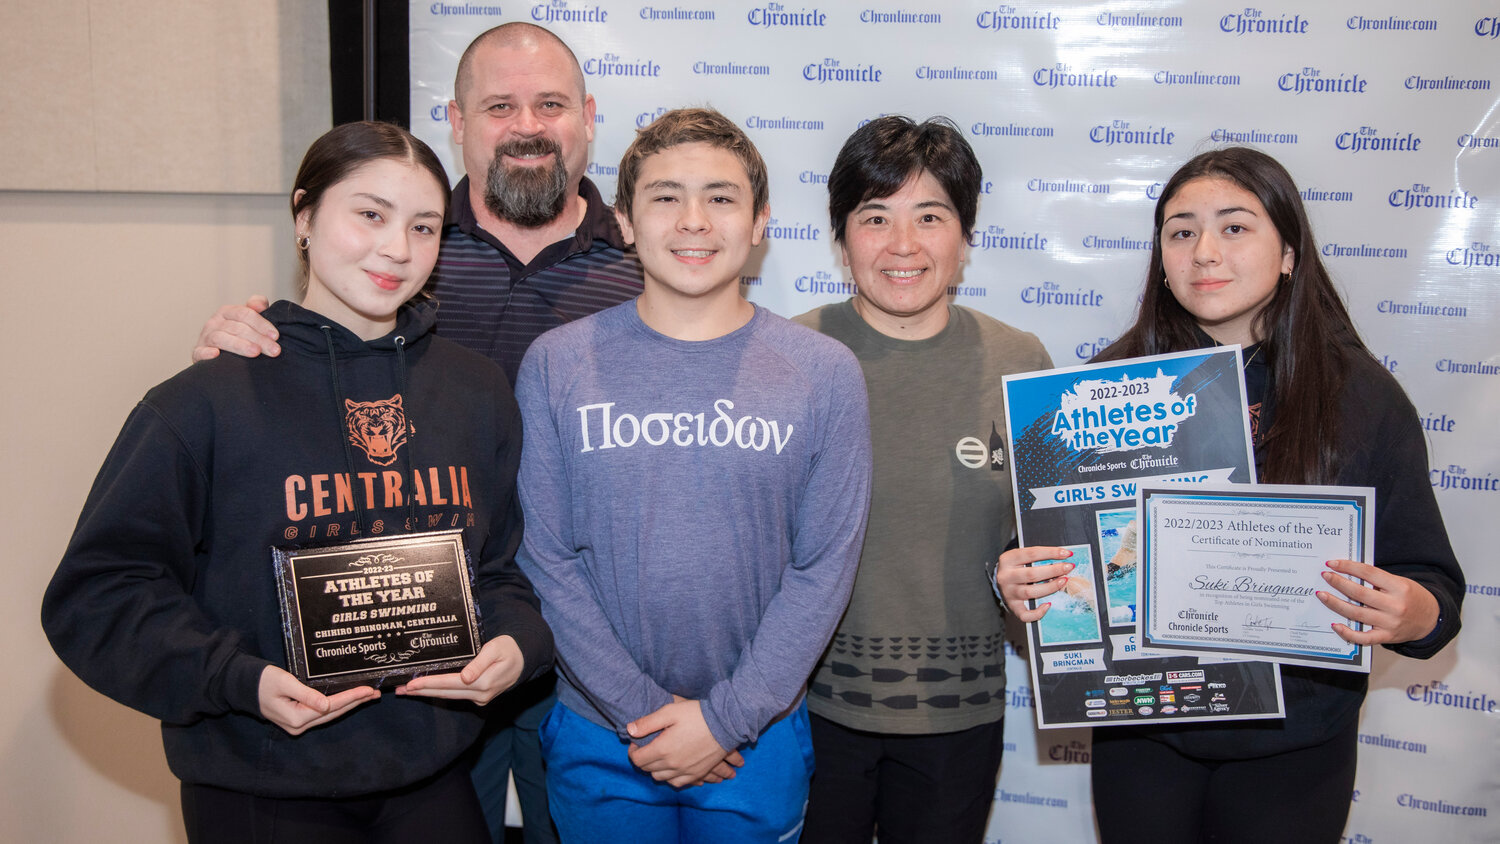 Centralia swimmers Chihiro and Suki Bringman smile for a photo with family Tuesday evening during the “Athletes of the Year” banquet at the Jester Auto Museum. Chihiro finished fourth at State for the 200 meter freestyle and fifth for the 500 meter freestyle after winning a pair of events at the district championships in Shelton. Suki also had a strong season for the Tigers finishing twelfth at State in the 500 meter freestyle and sixteenth in the 50 meter freestyle.